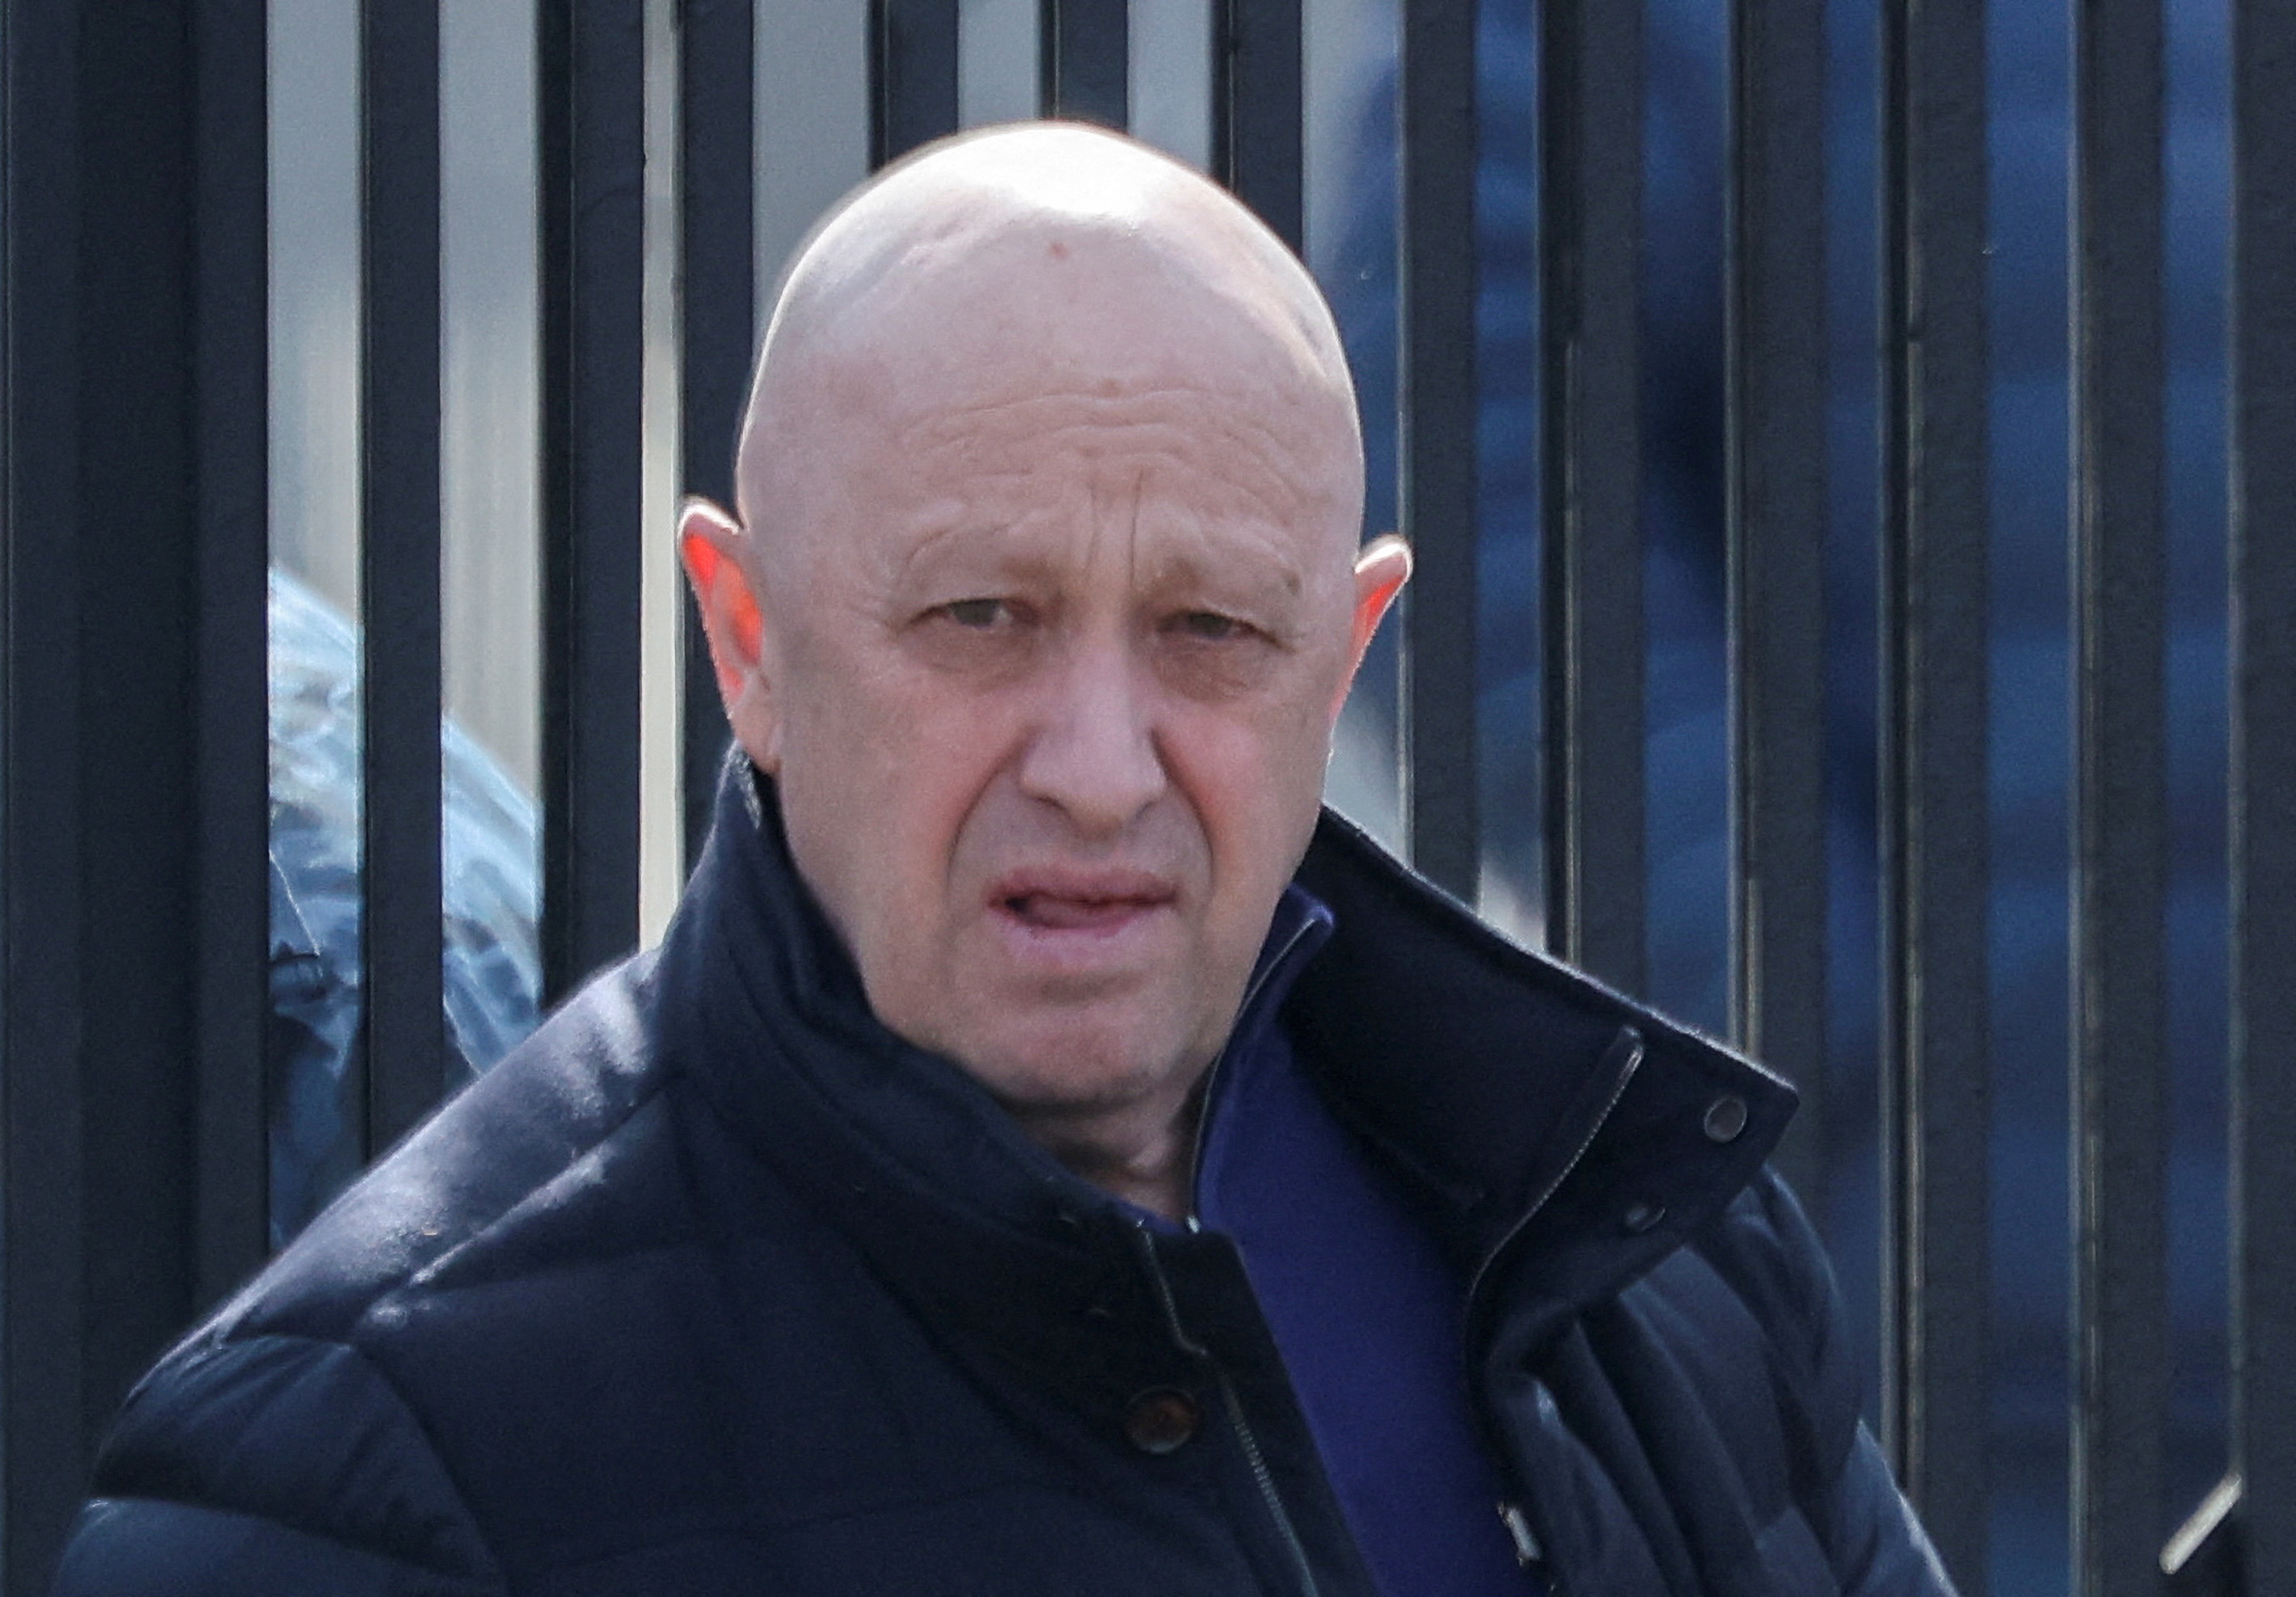 Founder of the Wagner Group Yevgeny Prigozhin is seen in Moscow in April.